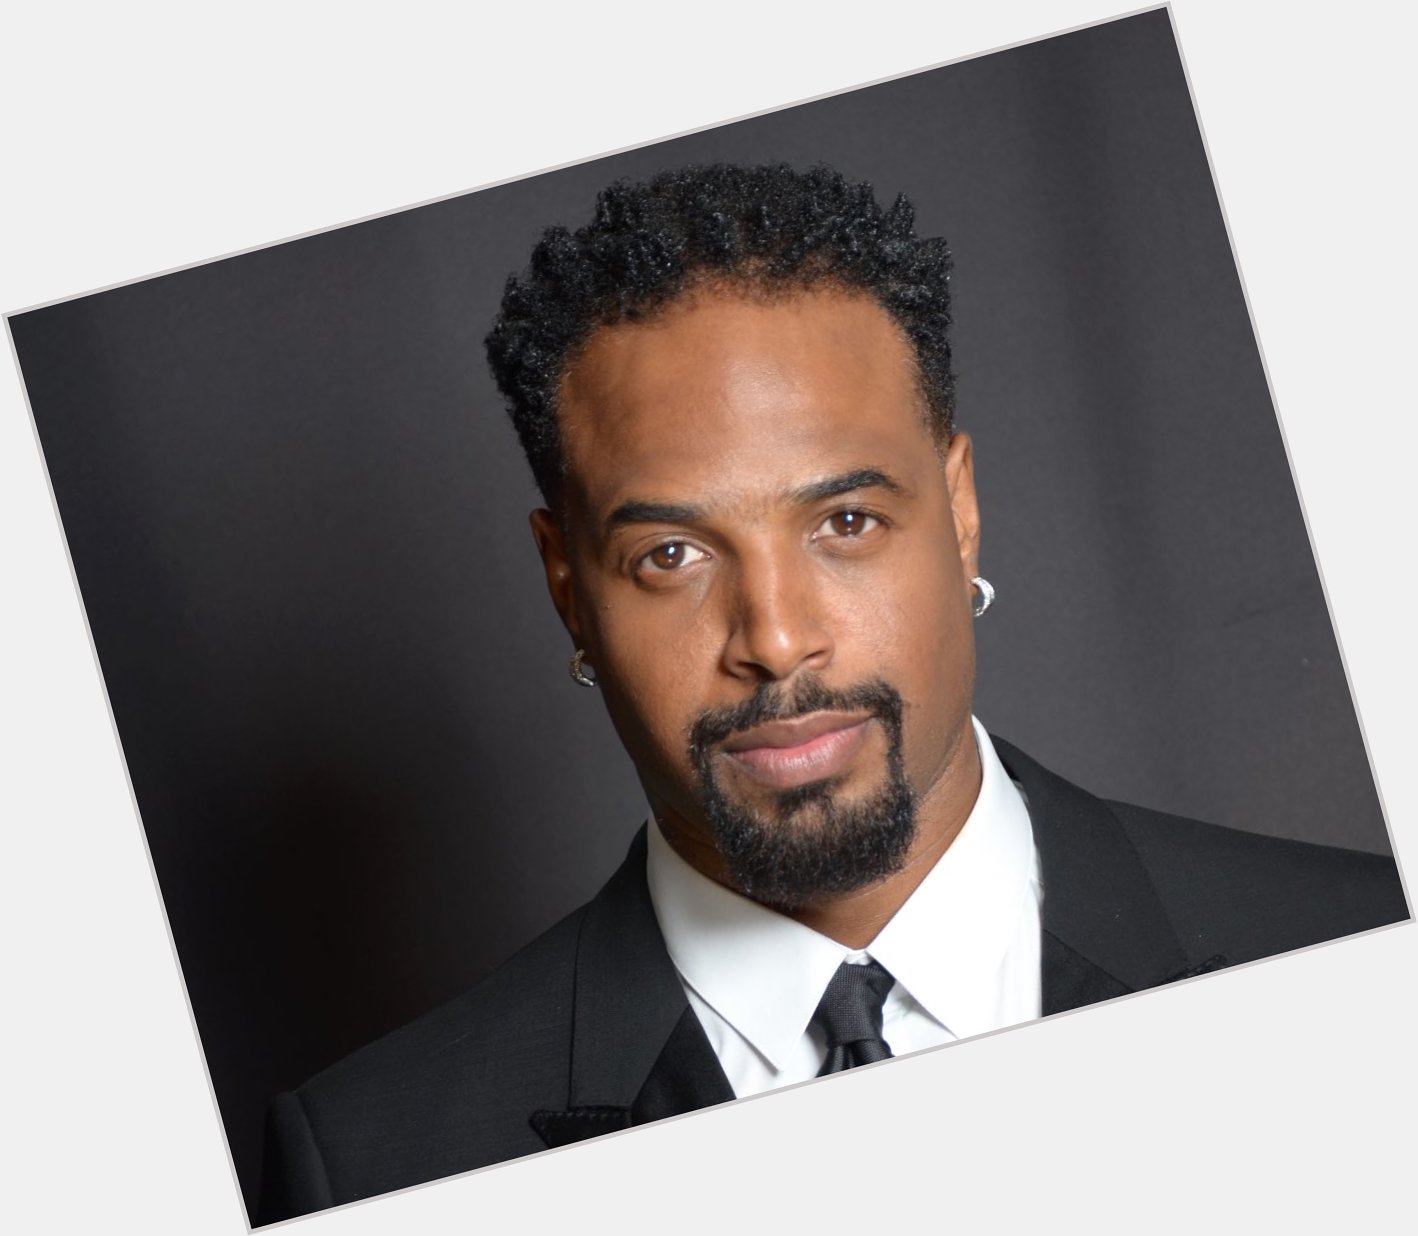 Happy 51st Birthday to actor, comedian, writer and producer, Shawn Wayans! 